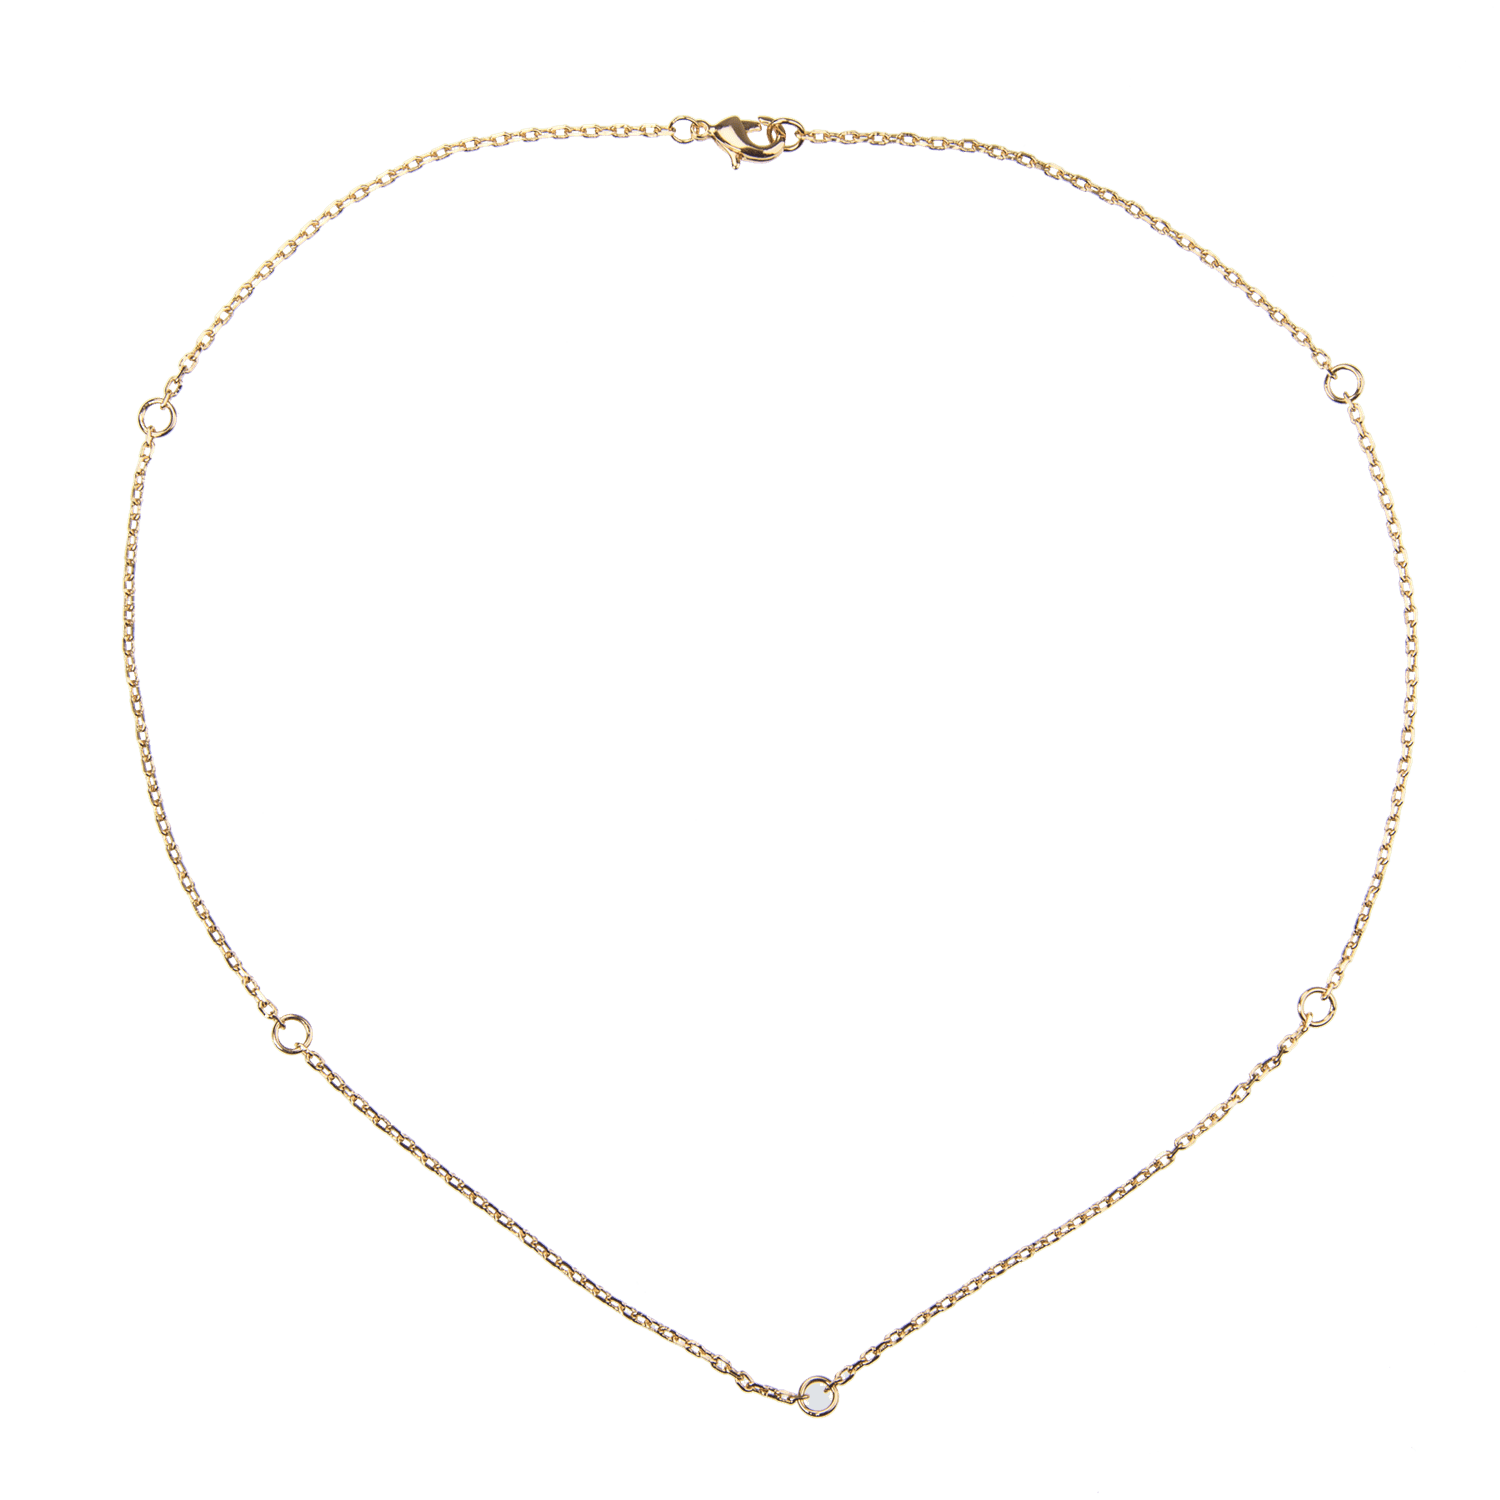 Emilia Gold necklace with rings